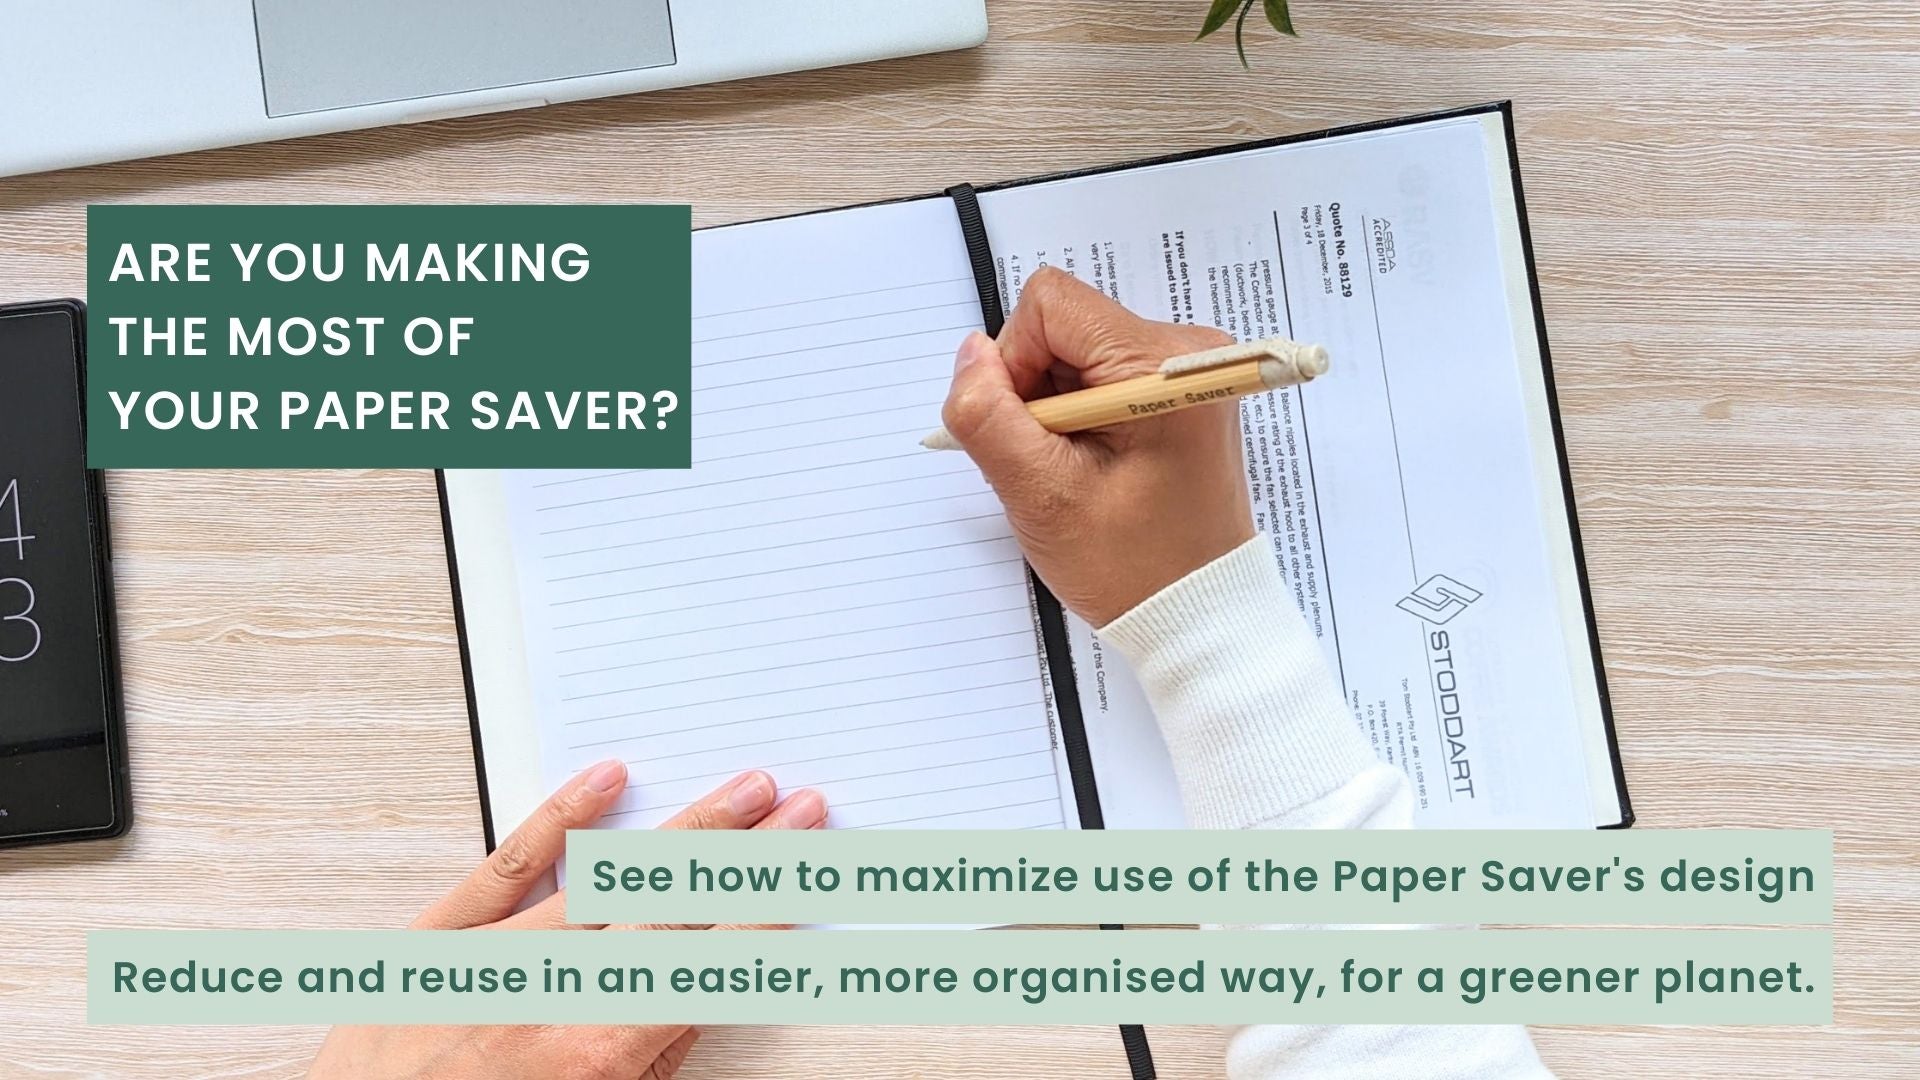 Reduce and reuse better with the Paper Saver Reusable Notebook for a more sustainable planet.